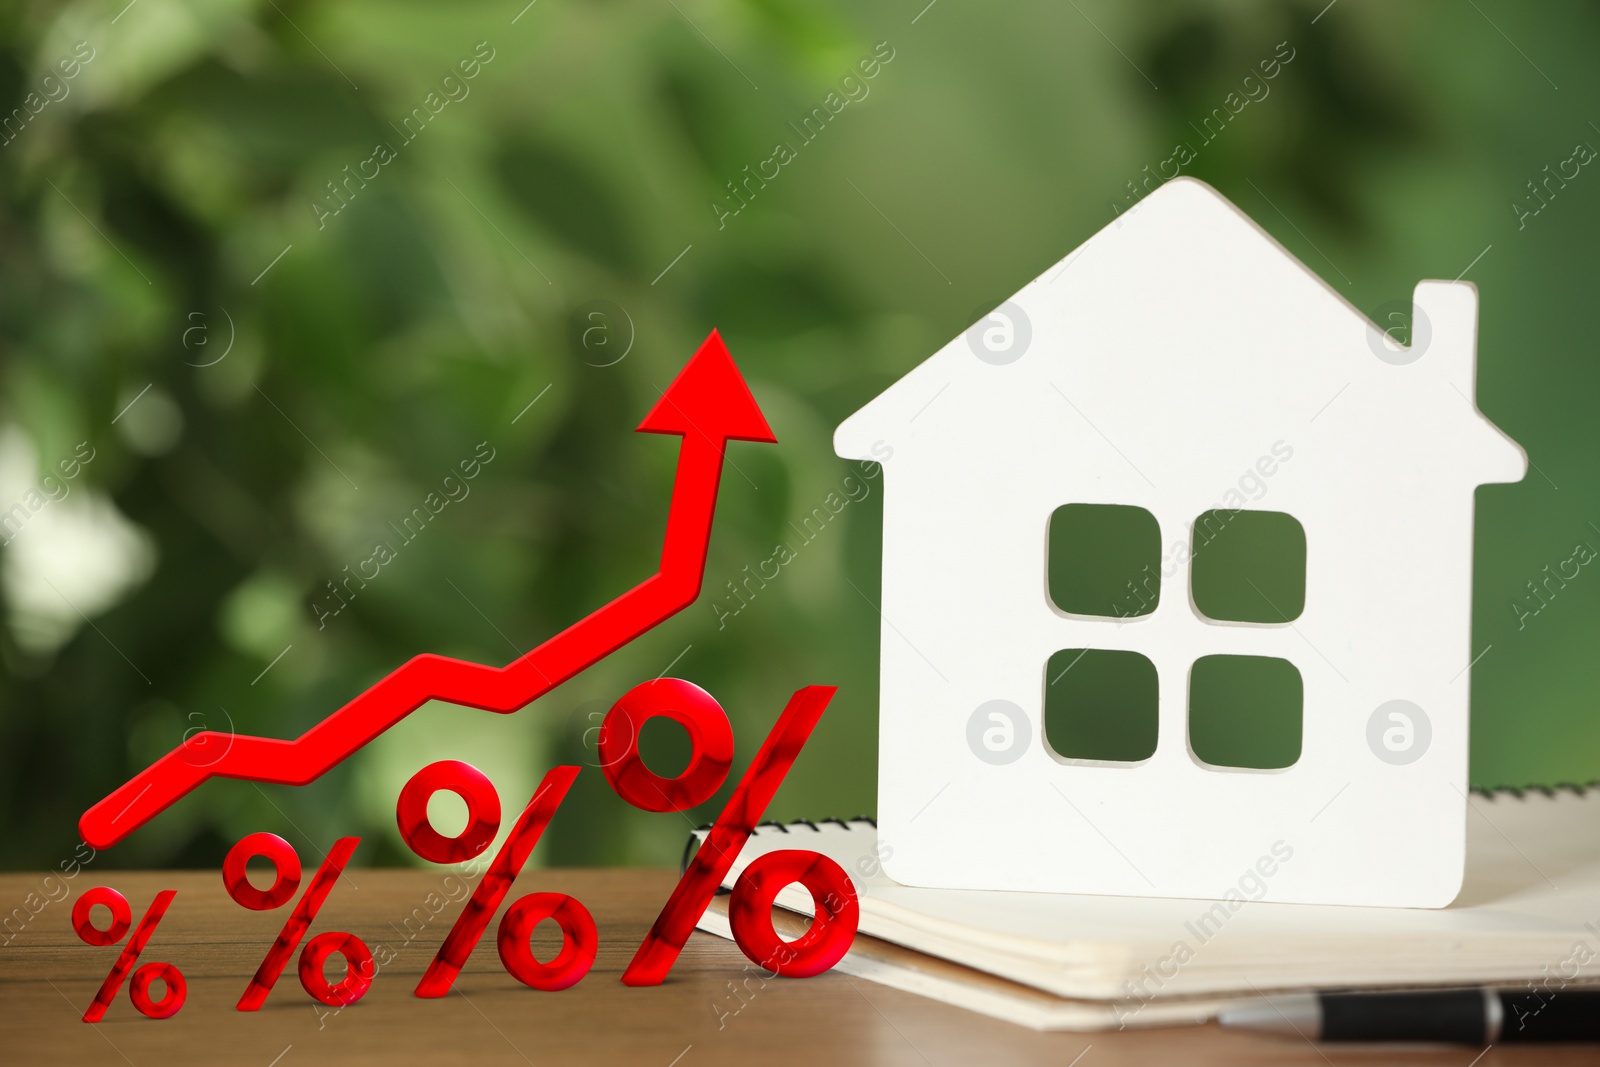 Image of Mortgage rate rising illustrated by percent signs and upward arrow. White house model and notebook on wooden table